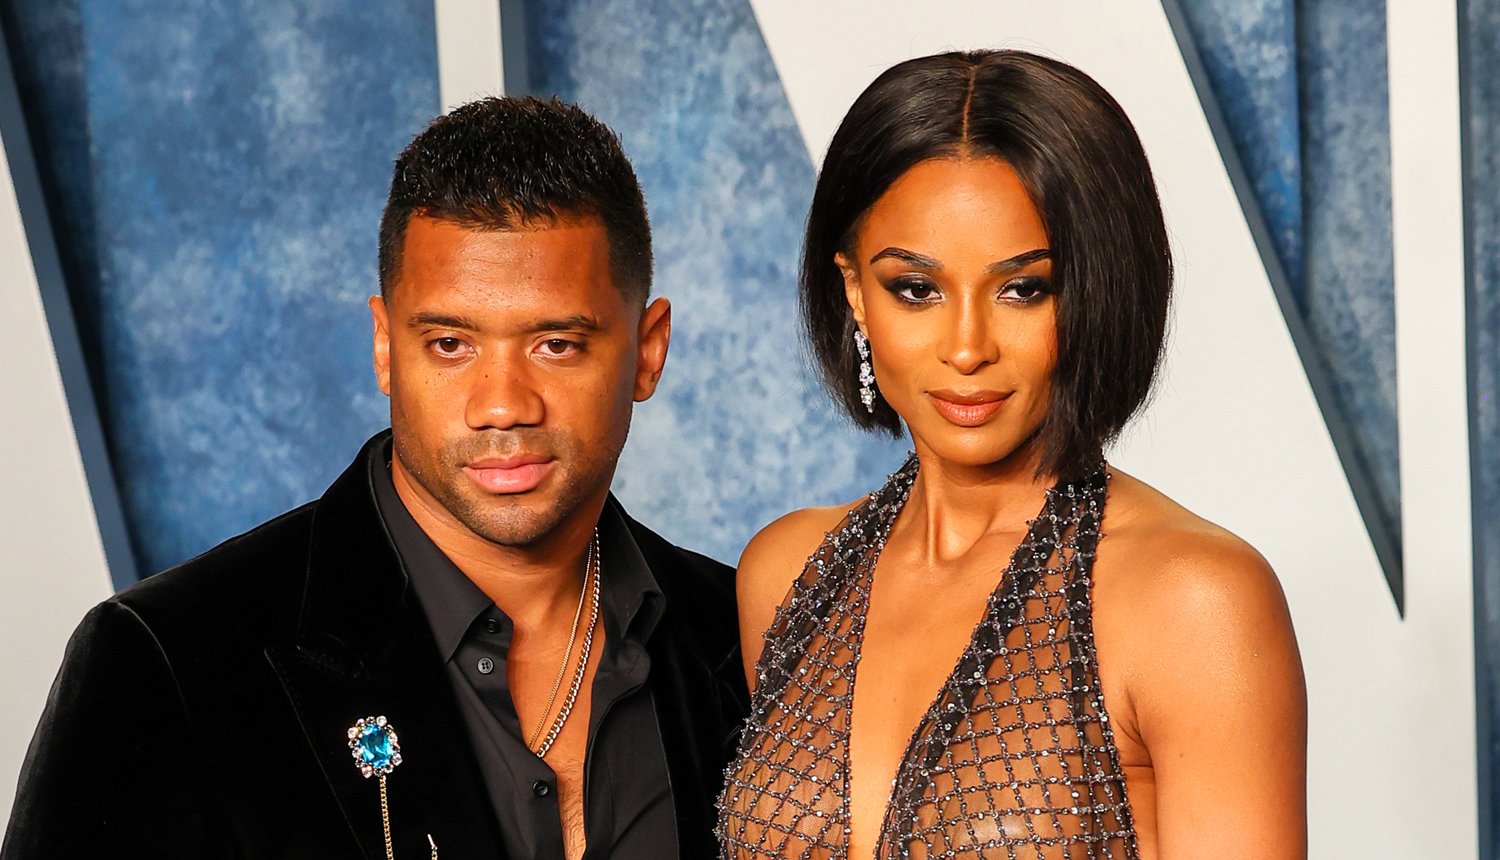 Ciara Wears Most Daring Look Yet, Goes Fully Sheer at Vanity Fair Oscar Party 2023 with Russell Wilson